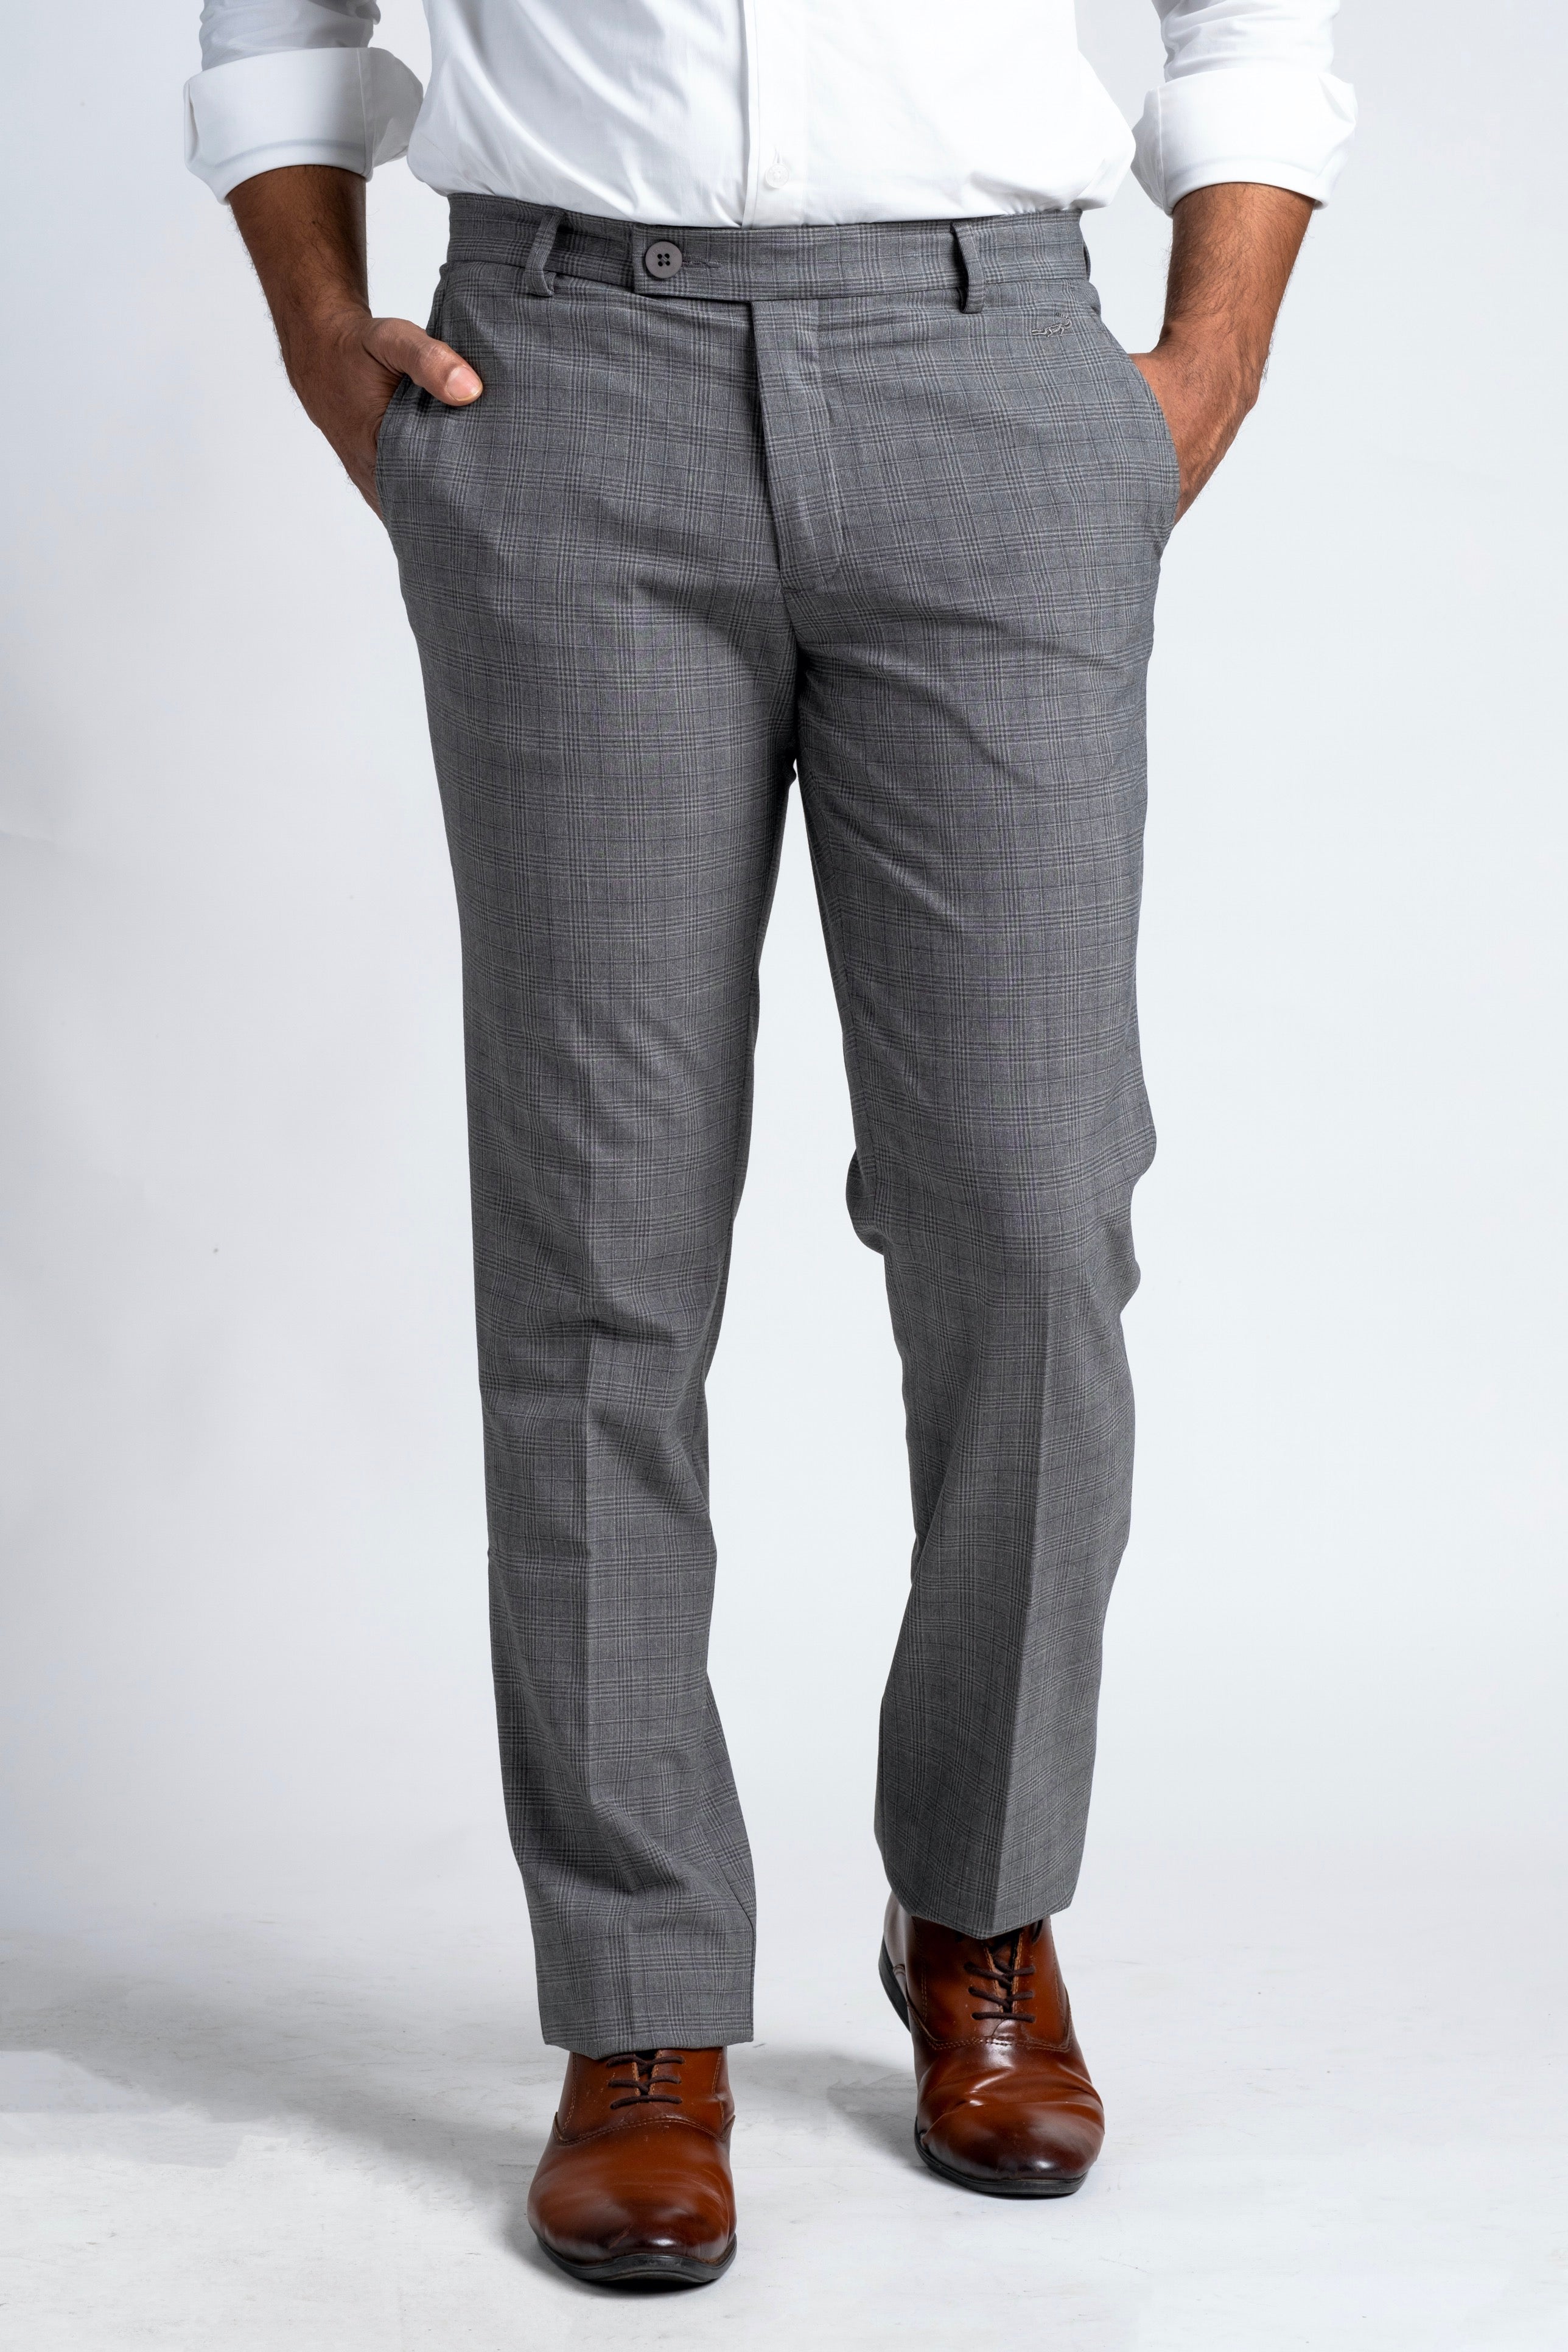 Markham - Step up your trouser game. Trousers | R499... | Facebook